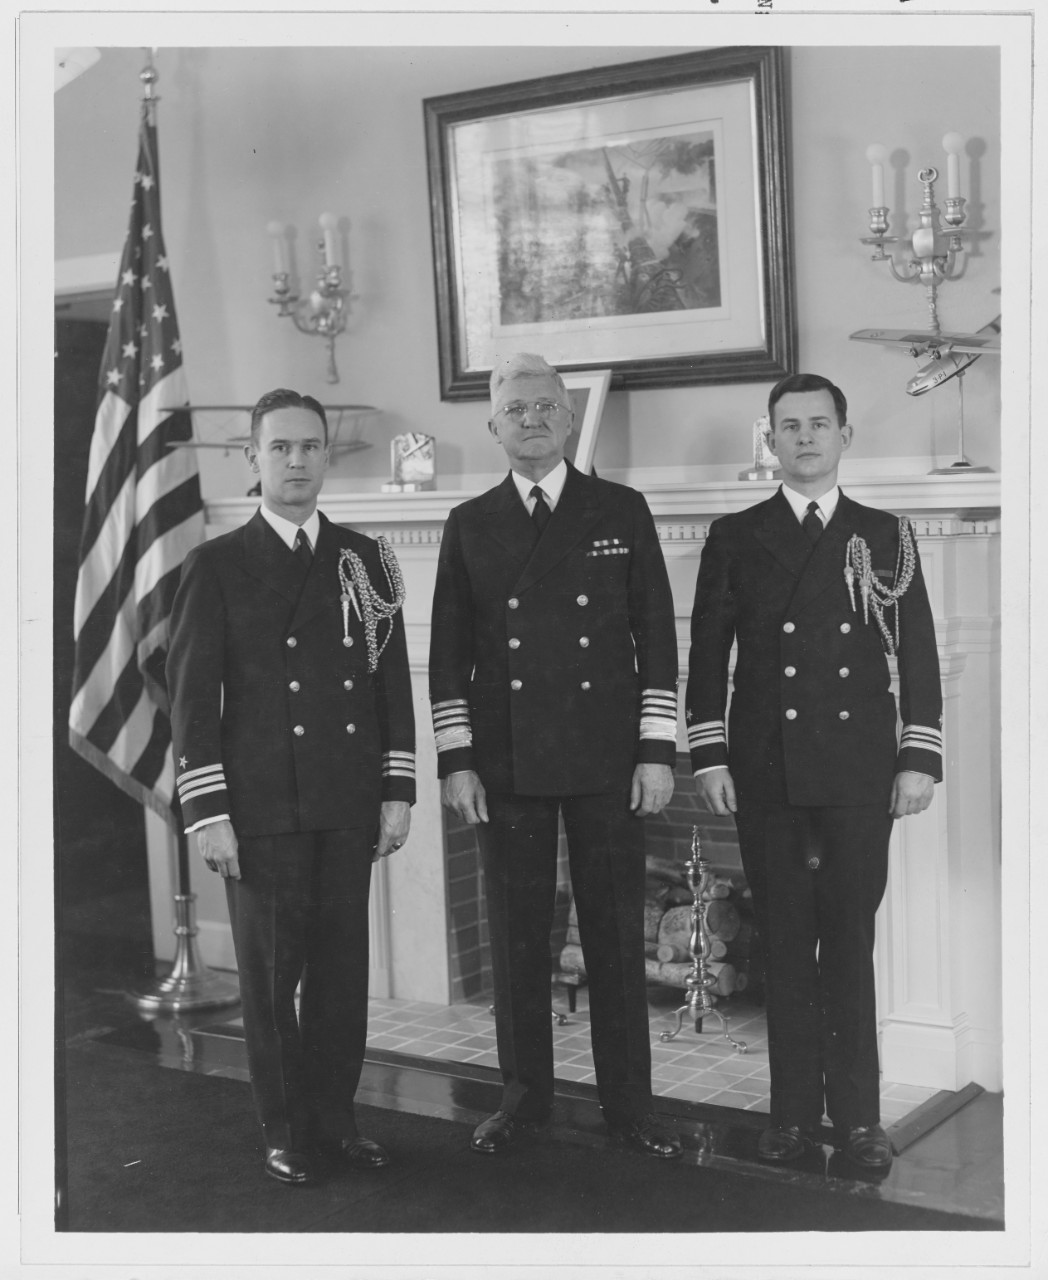 L to R: Comdr. Charles Wellborn, Jr., USN. Lt. Comdr W.R. Smedberg, 3rd, Usn-aides to chief of Naval operations and aides. Jan 1941